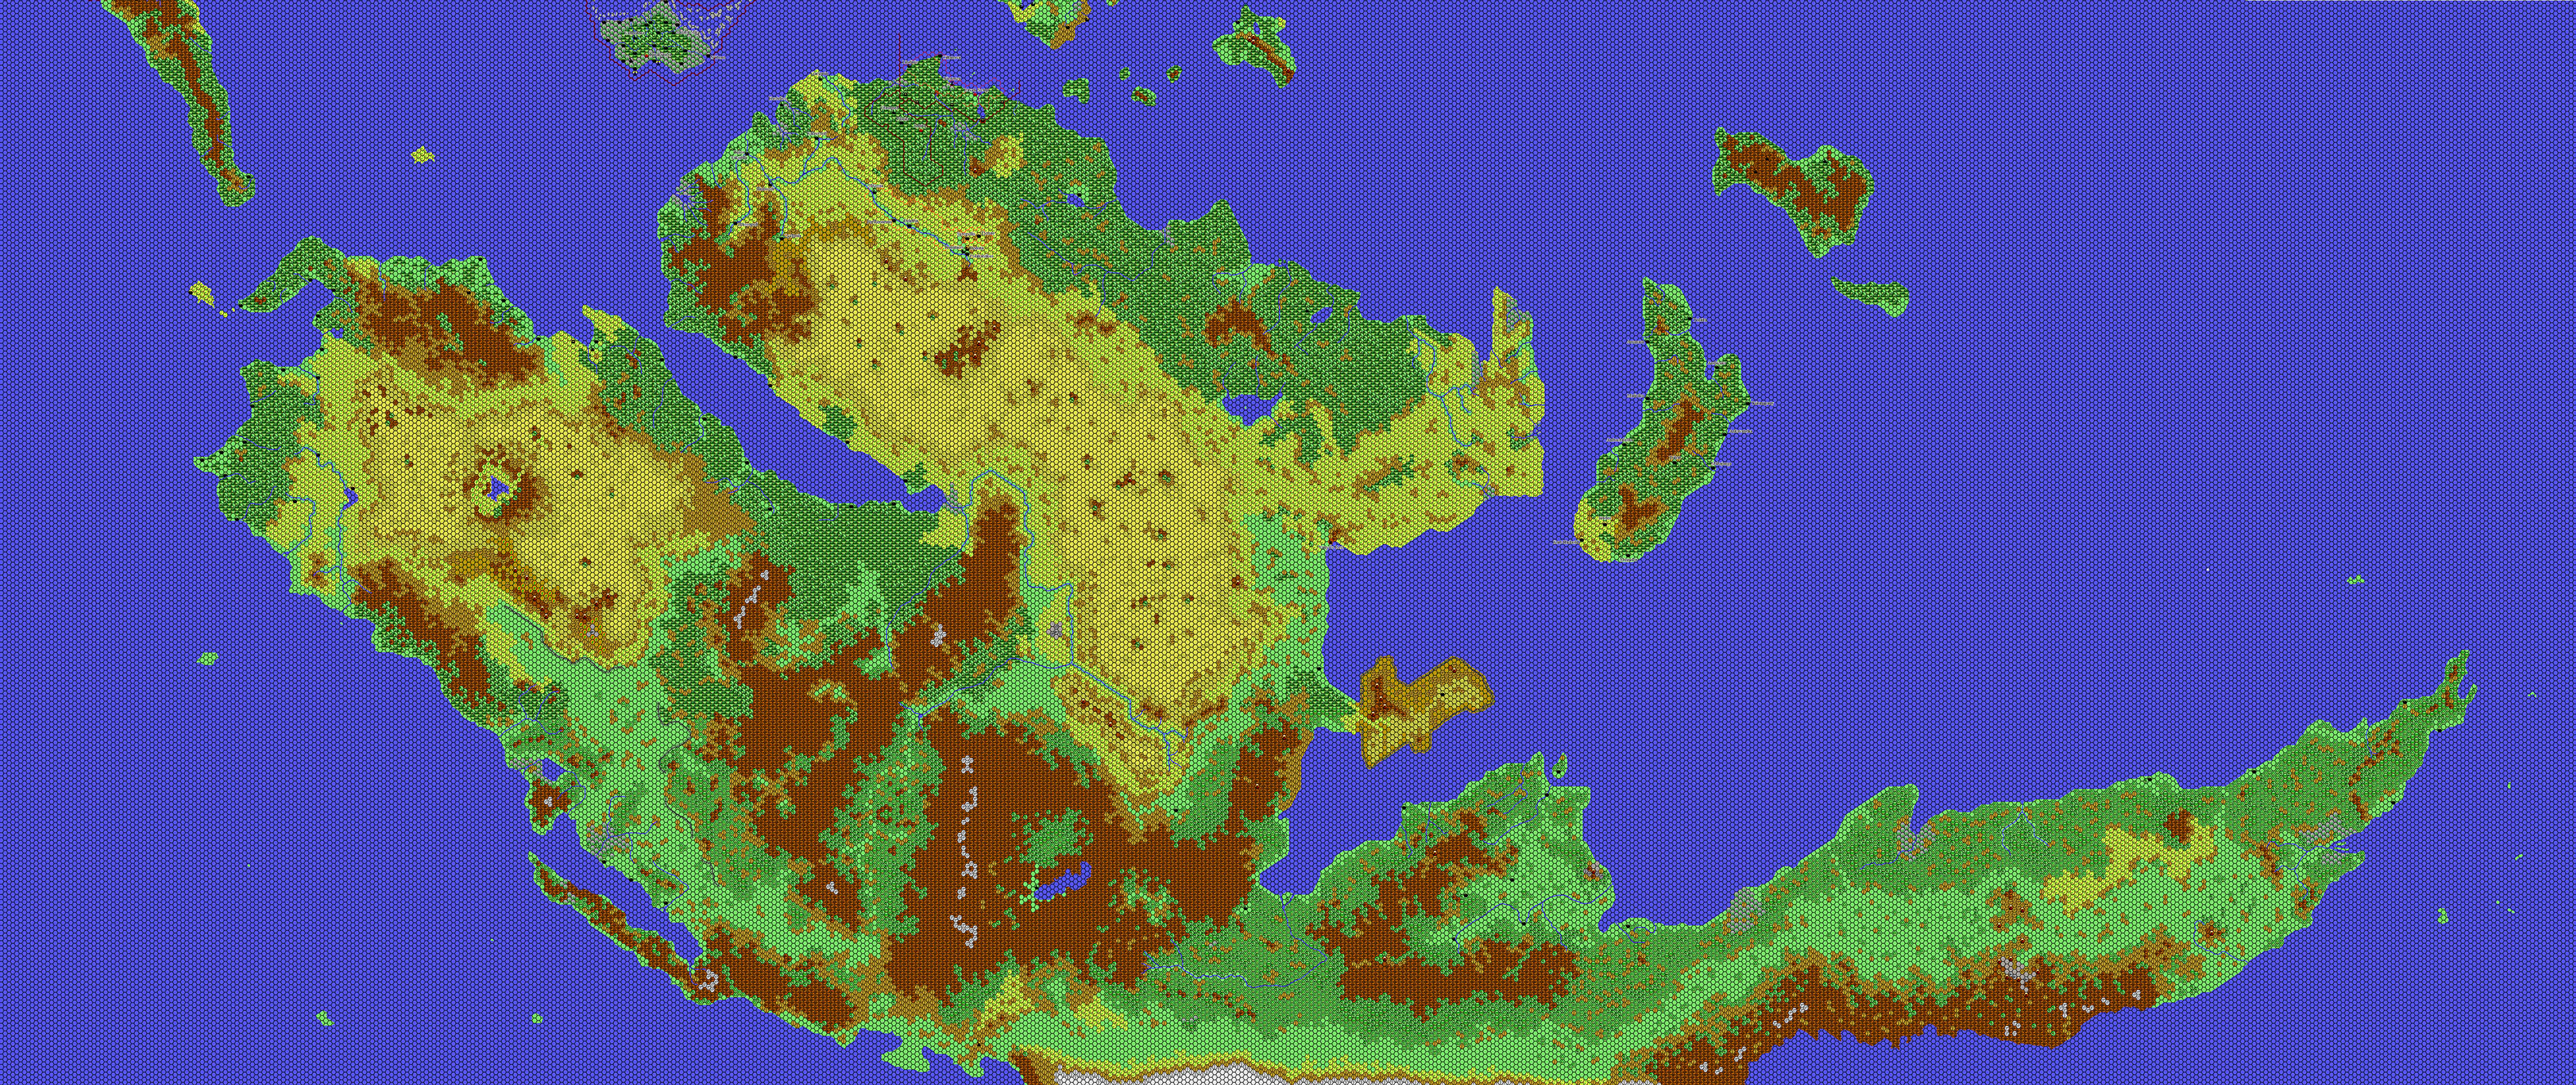 The Continent of Davania, 24 miles per hex by Thibault Sarlat, March 2003